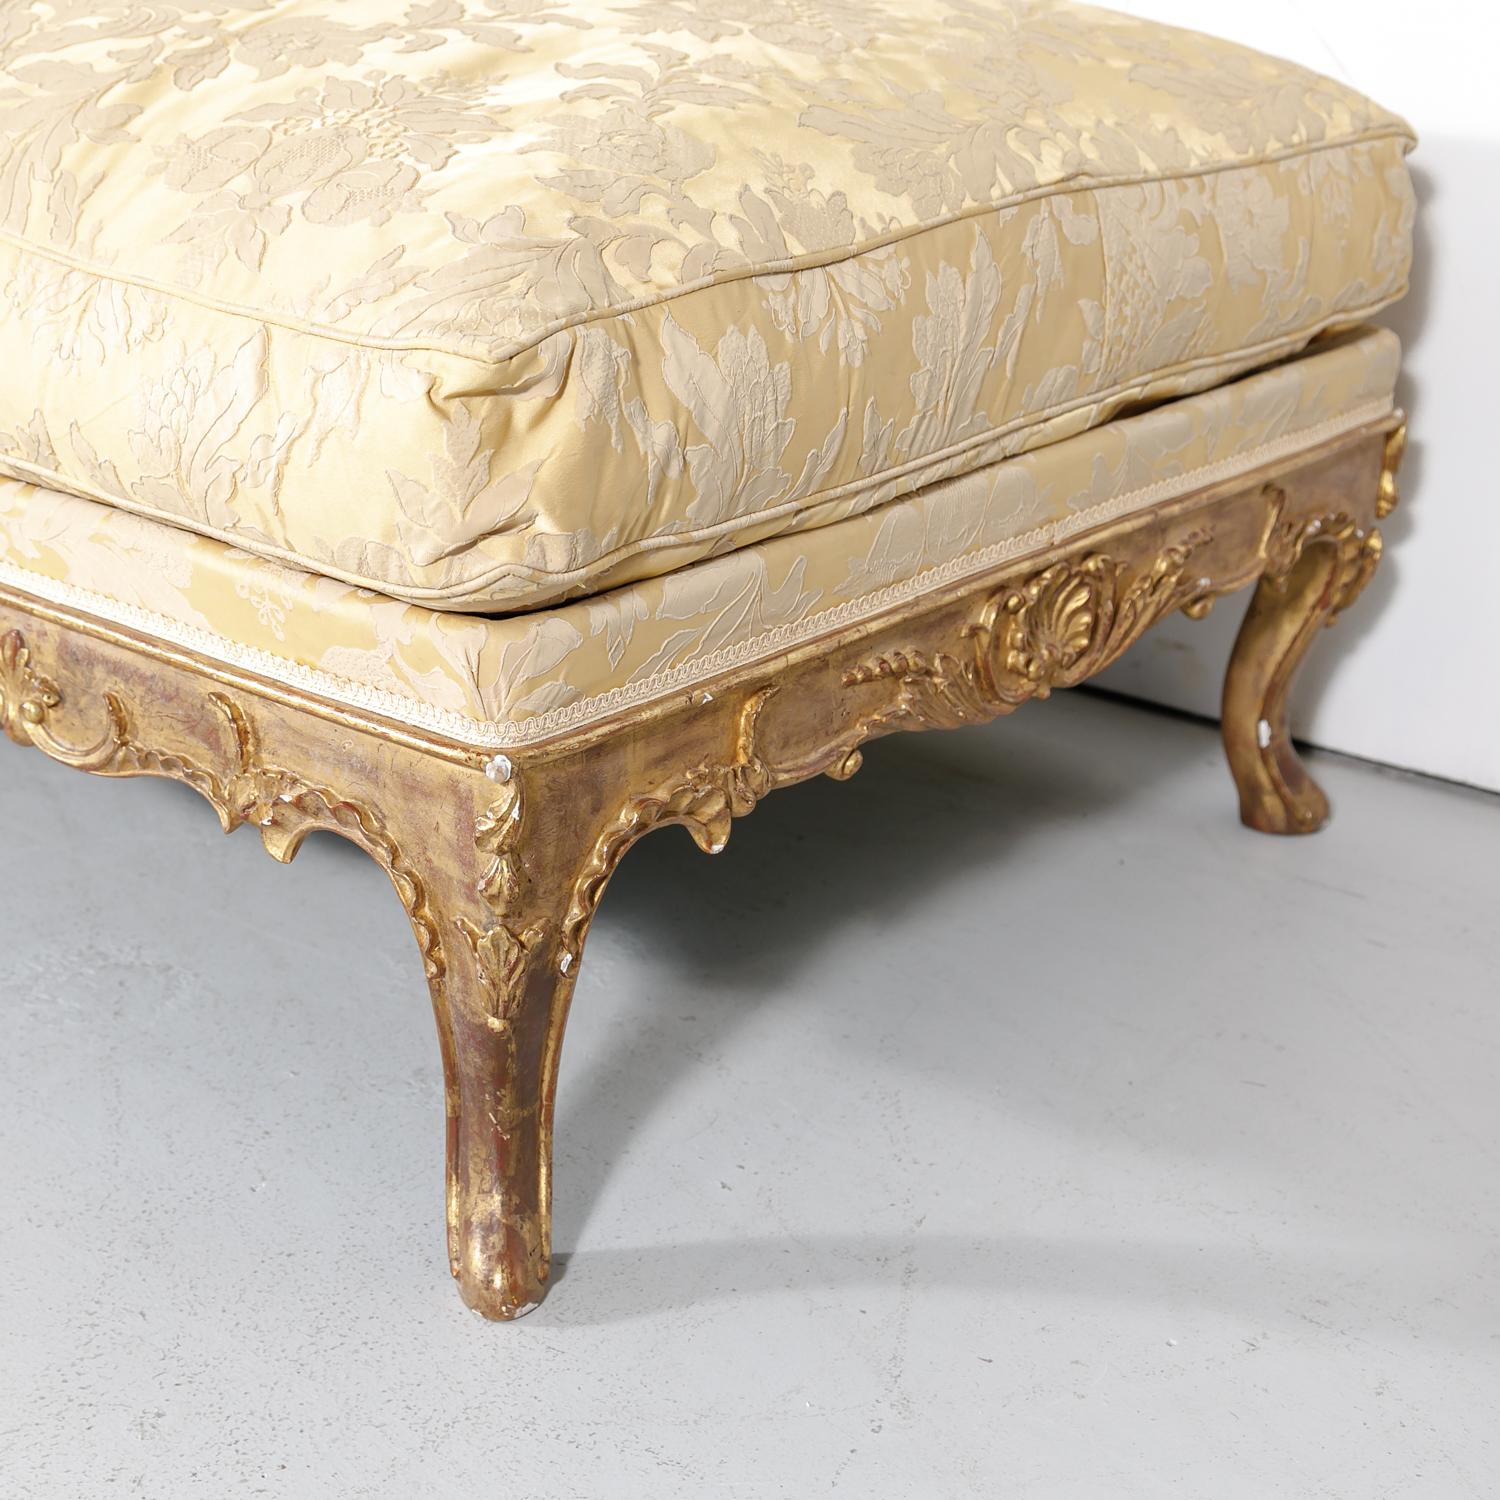 Damask Fine 19th Century Louis XV Style Giltwood Bench or Banquette with Loose Cushion